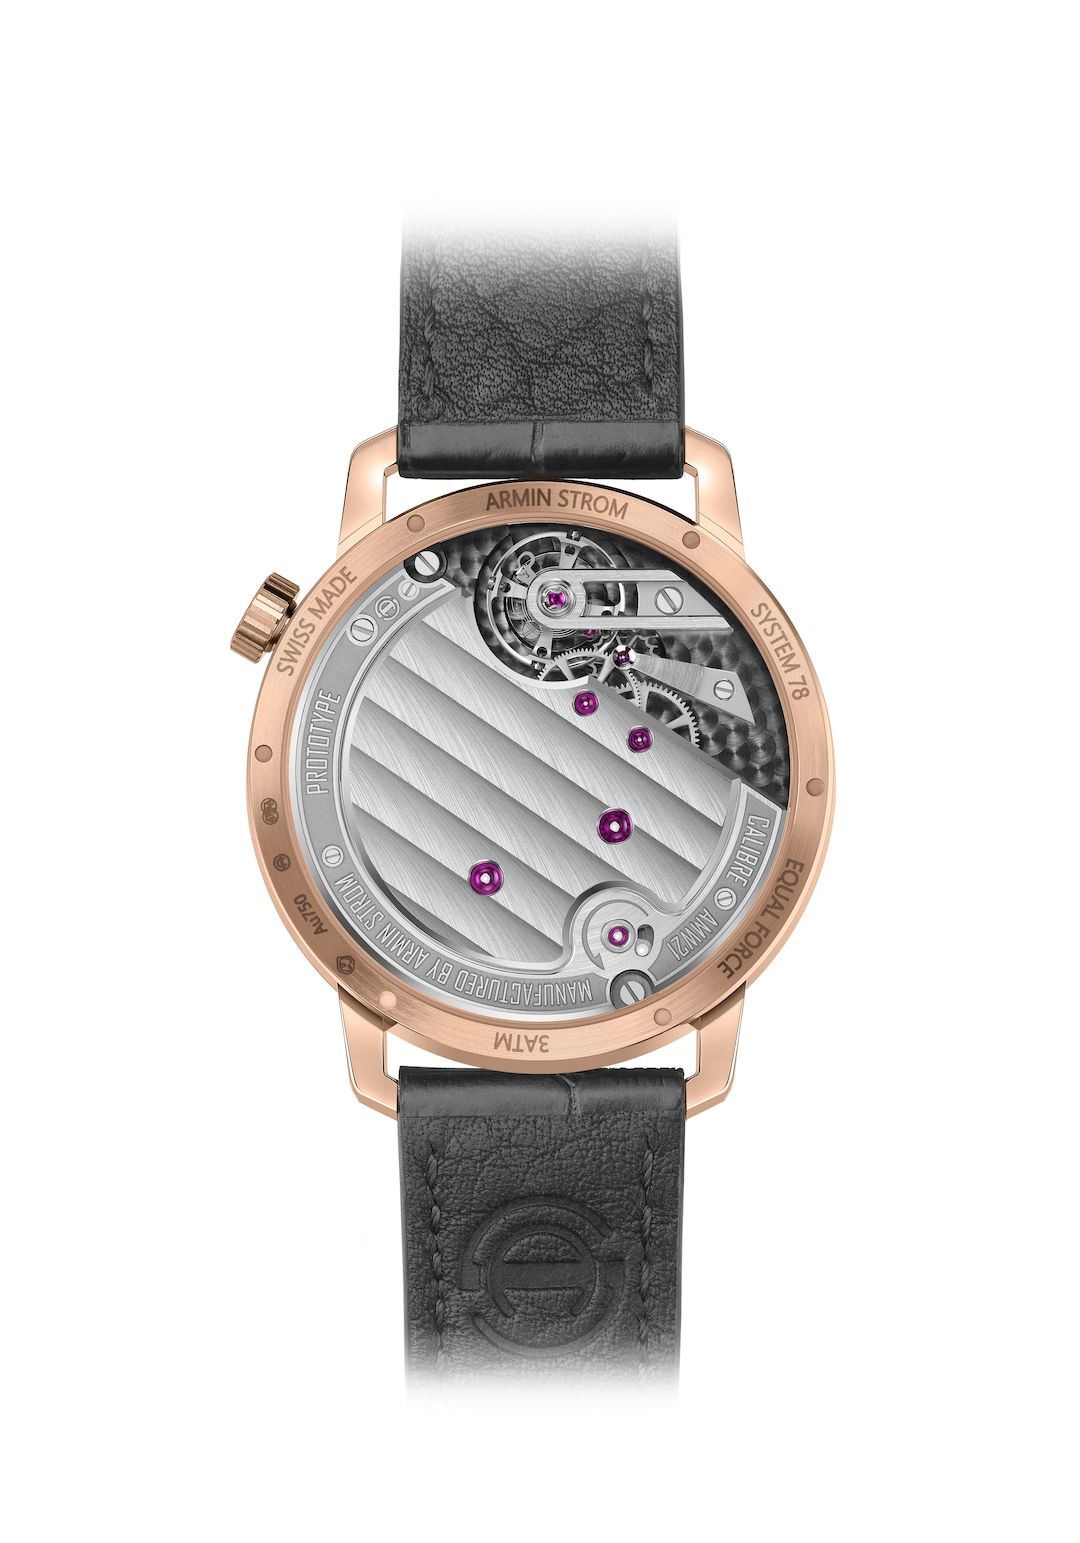 The fine finishing of this independent brand can be seen via the transparent sapphire crystal case back of the Armin Strom Tribute 1 Rose Gold watch 